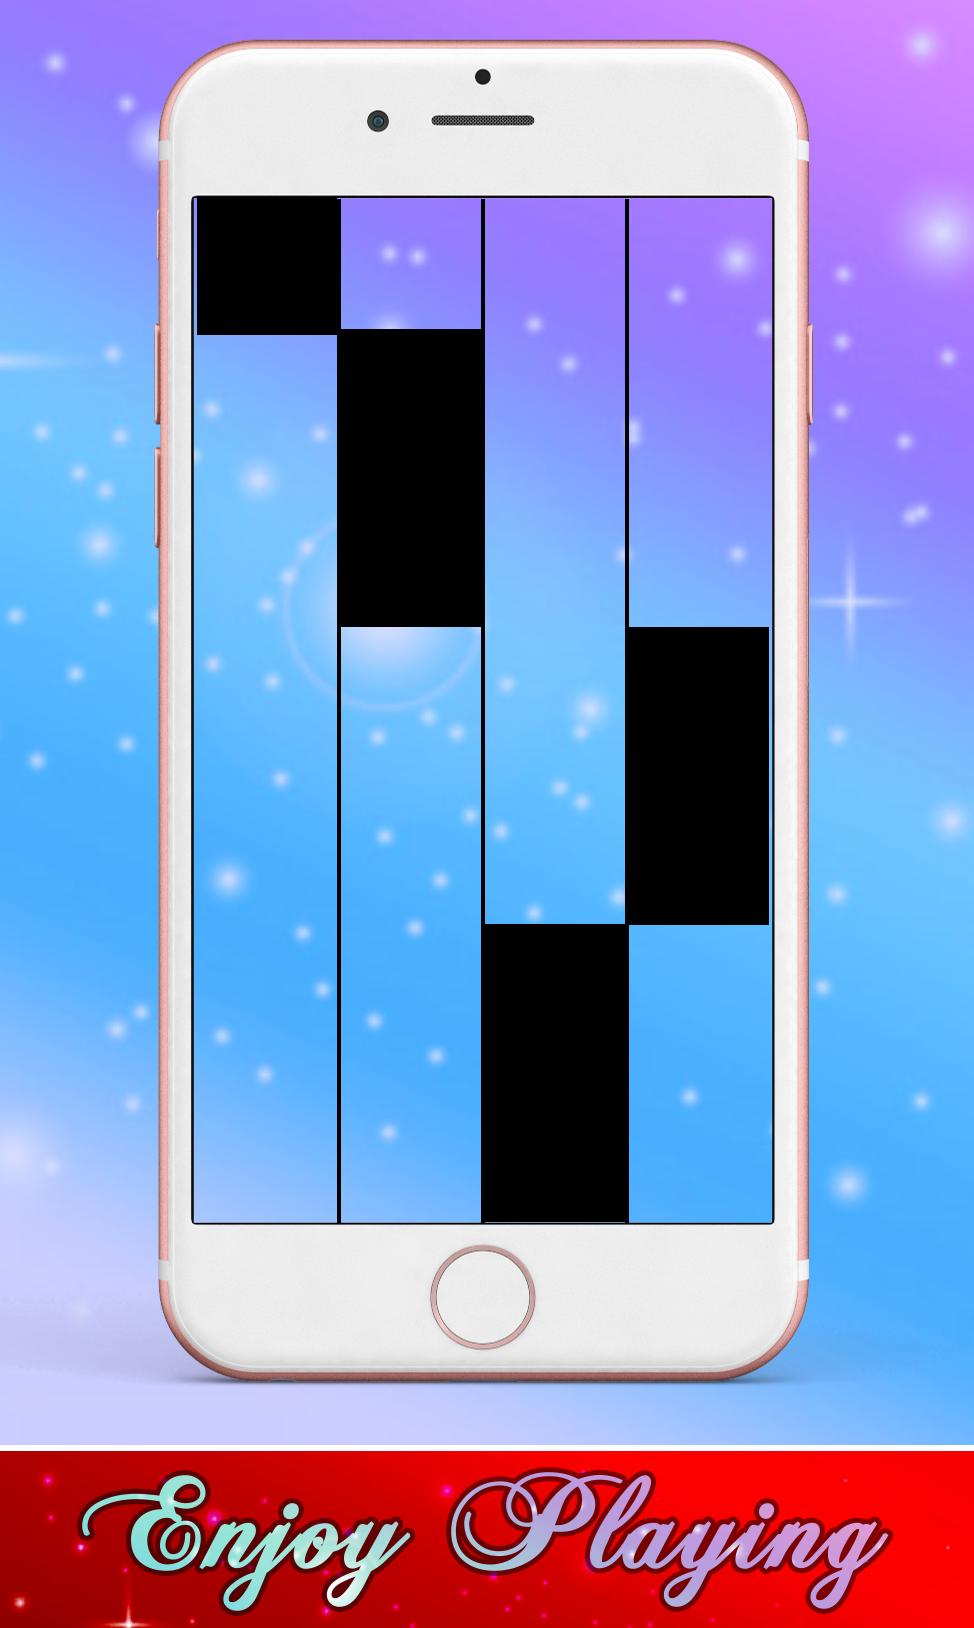 7 Rings Ariana Grande Piano Black Tiles For Android Apk